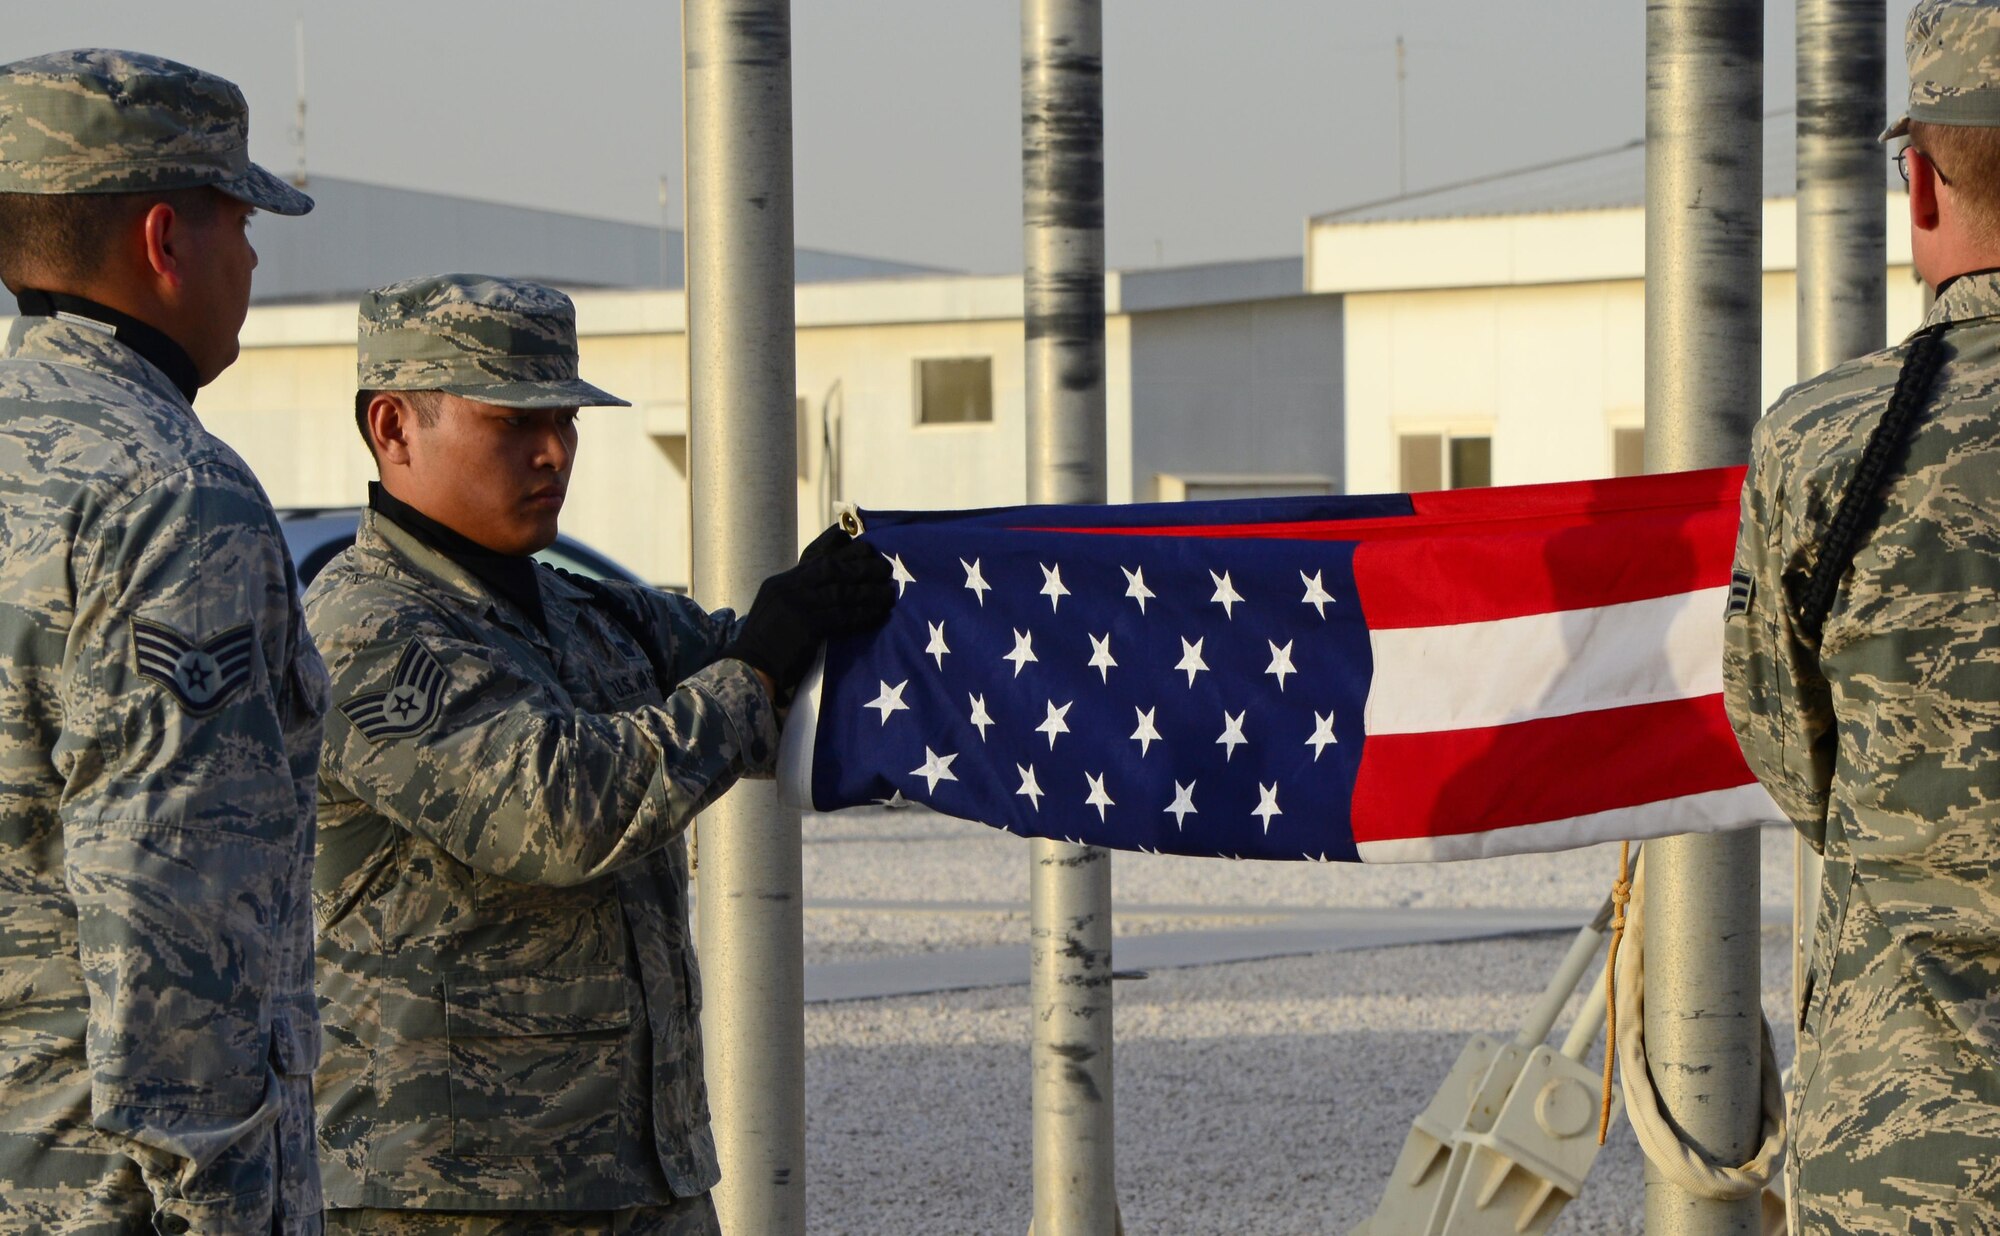 U.S. Air Force Airmen from the 379th Air Expeditionary Wing Honor Guard lower the American flag during a Washington’s Birthday retreat ceremony, Feb. 16, 2015, at Al Udeid Air Base, Qatar. Washington’s Birthday, also known as President’s Day, was the first individual American whose life was officially celebrated with a holiday. (U.S. Air Force photo by Senior Airman Kia Atkins)